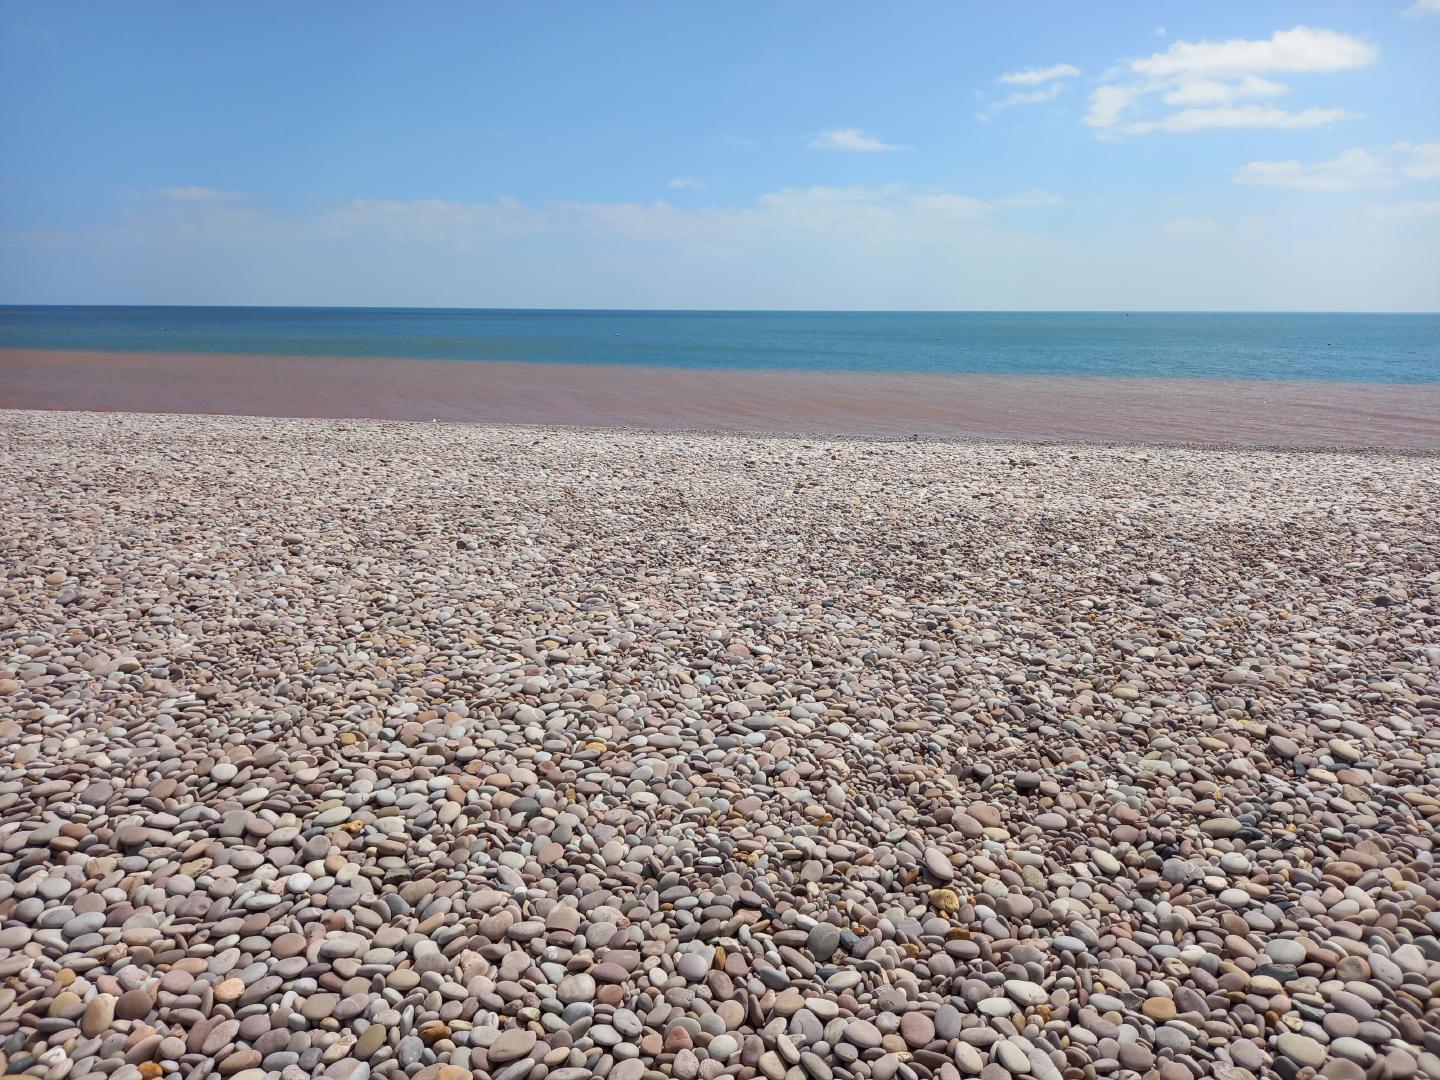 Budleigh beach and the English Channel